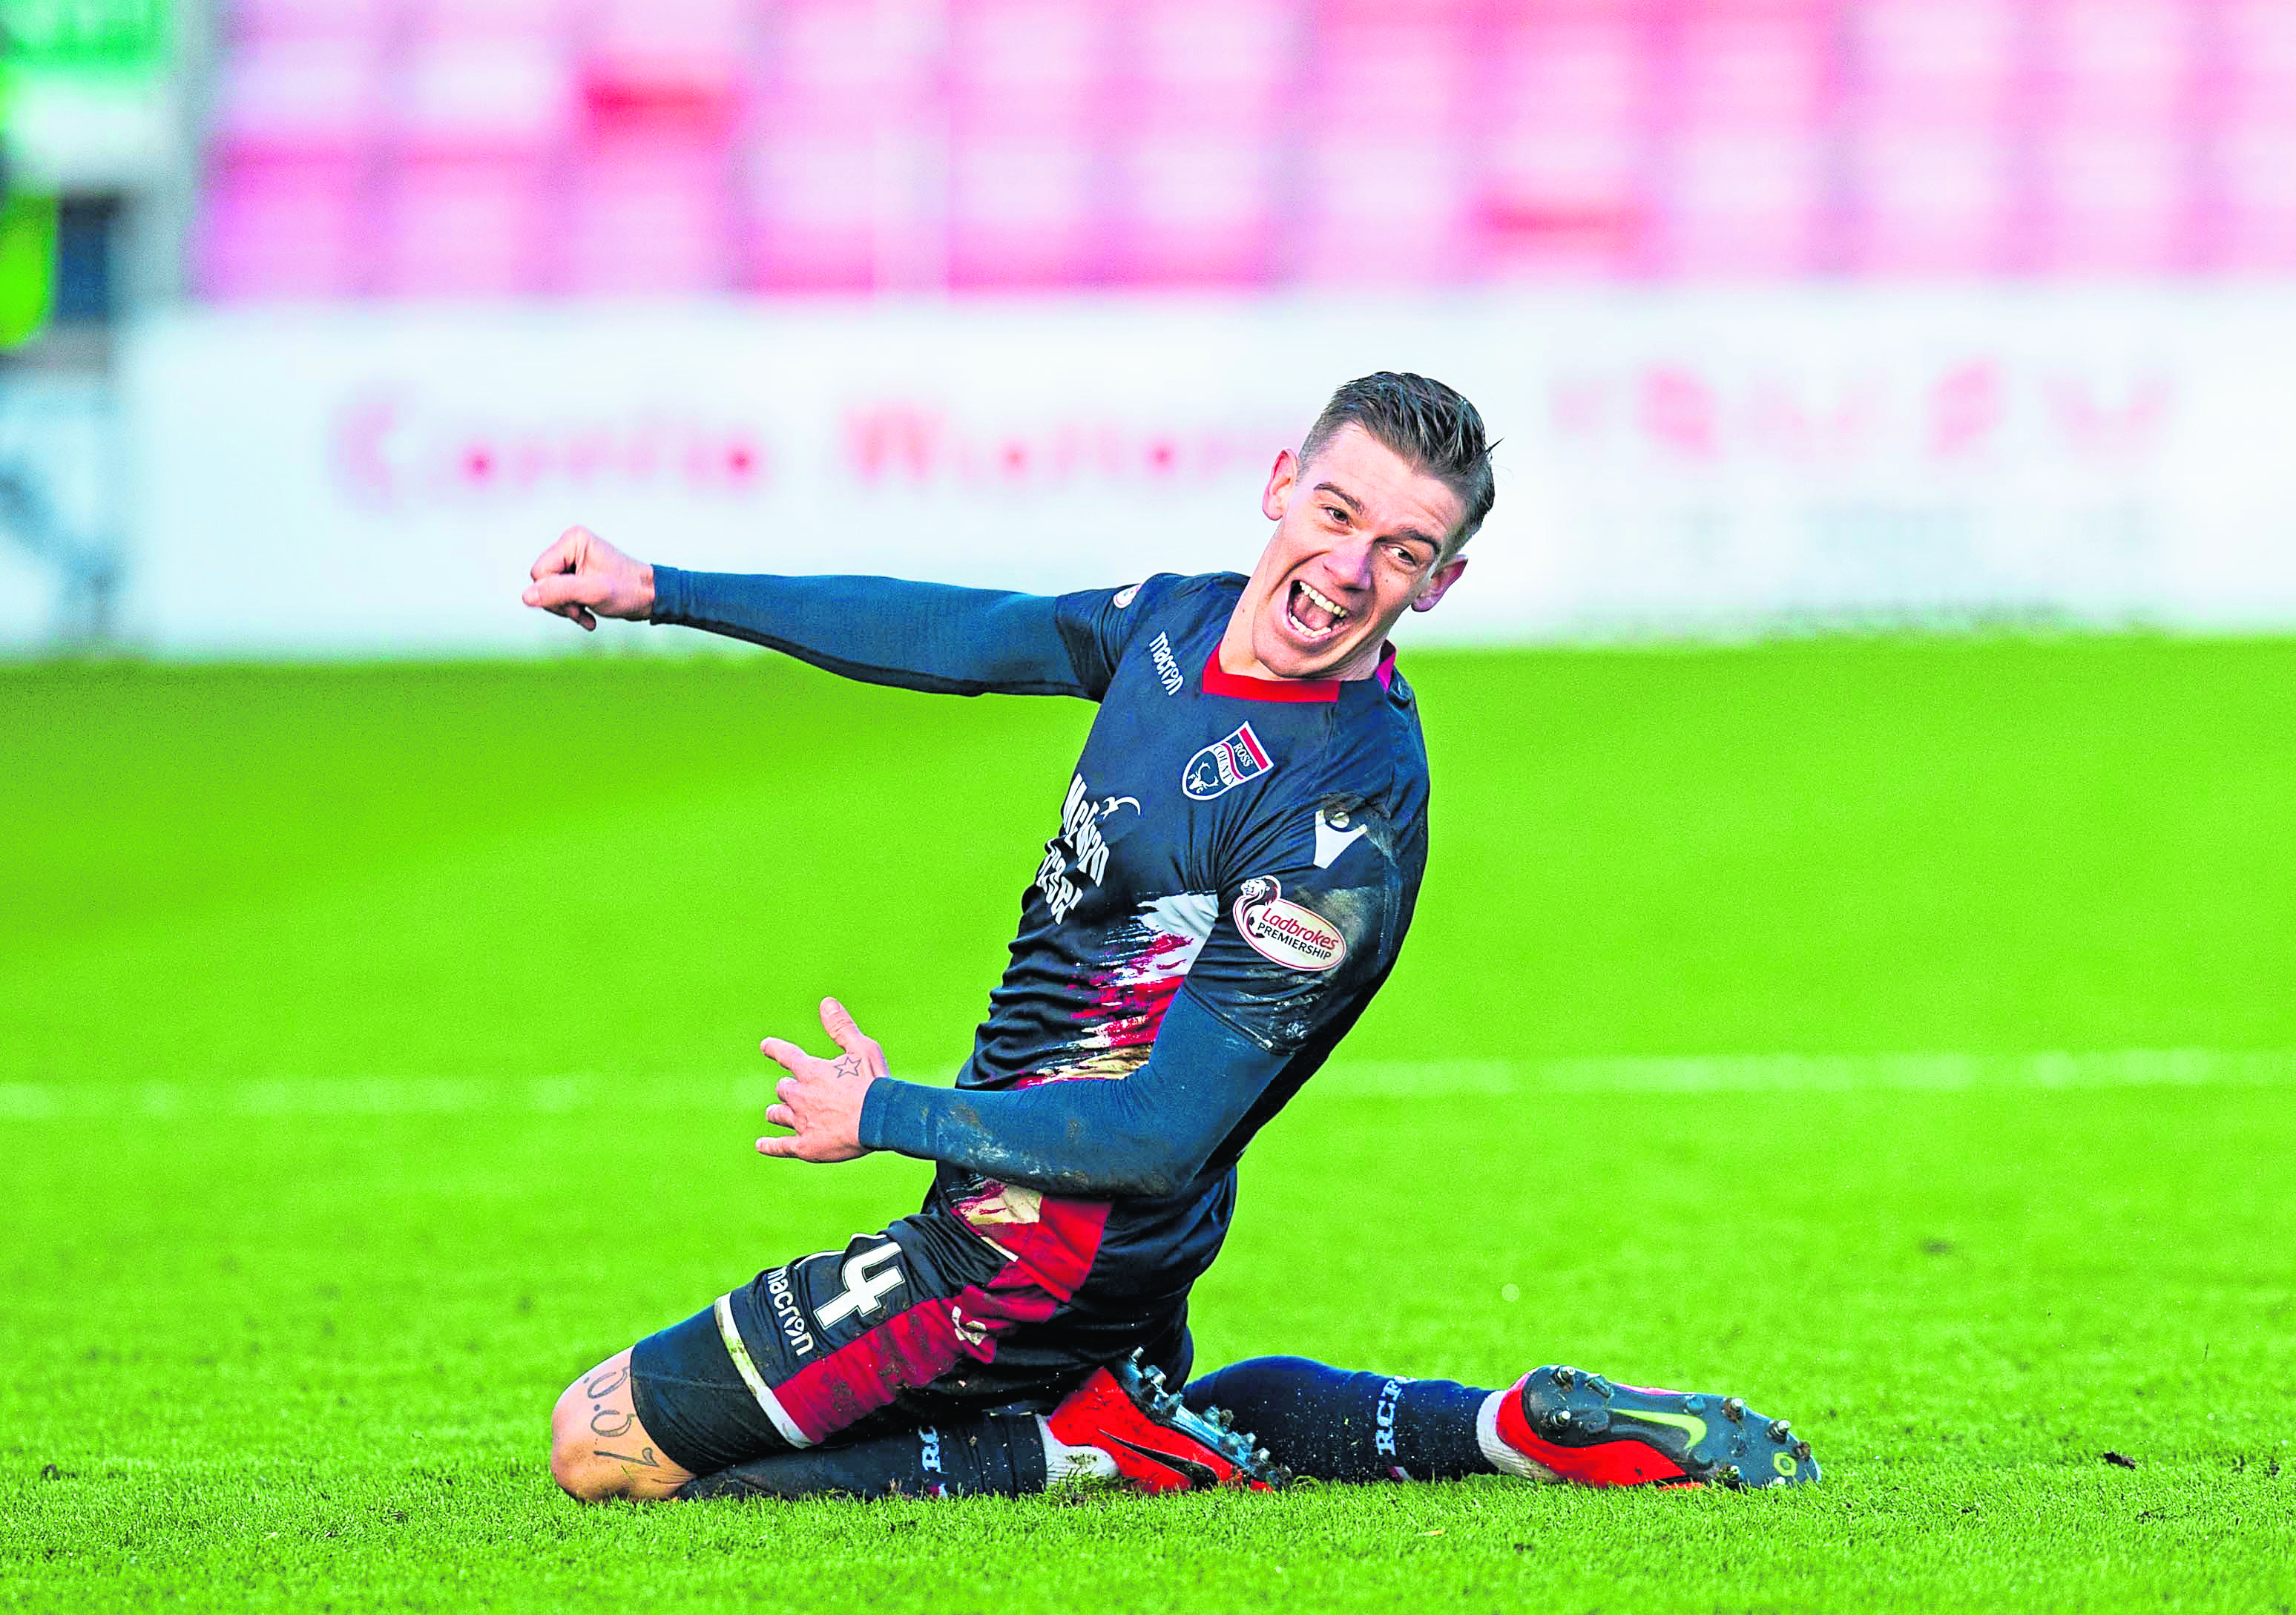 Ross County’s Josh Mullin celebrates after scoring the opening goal against Morton.